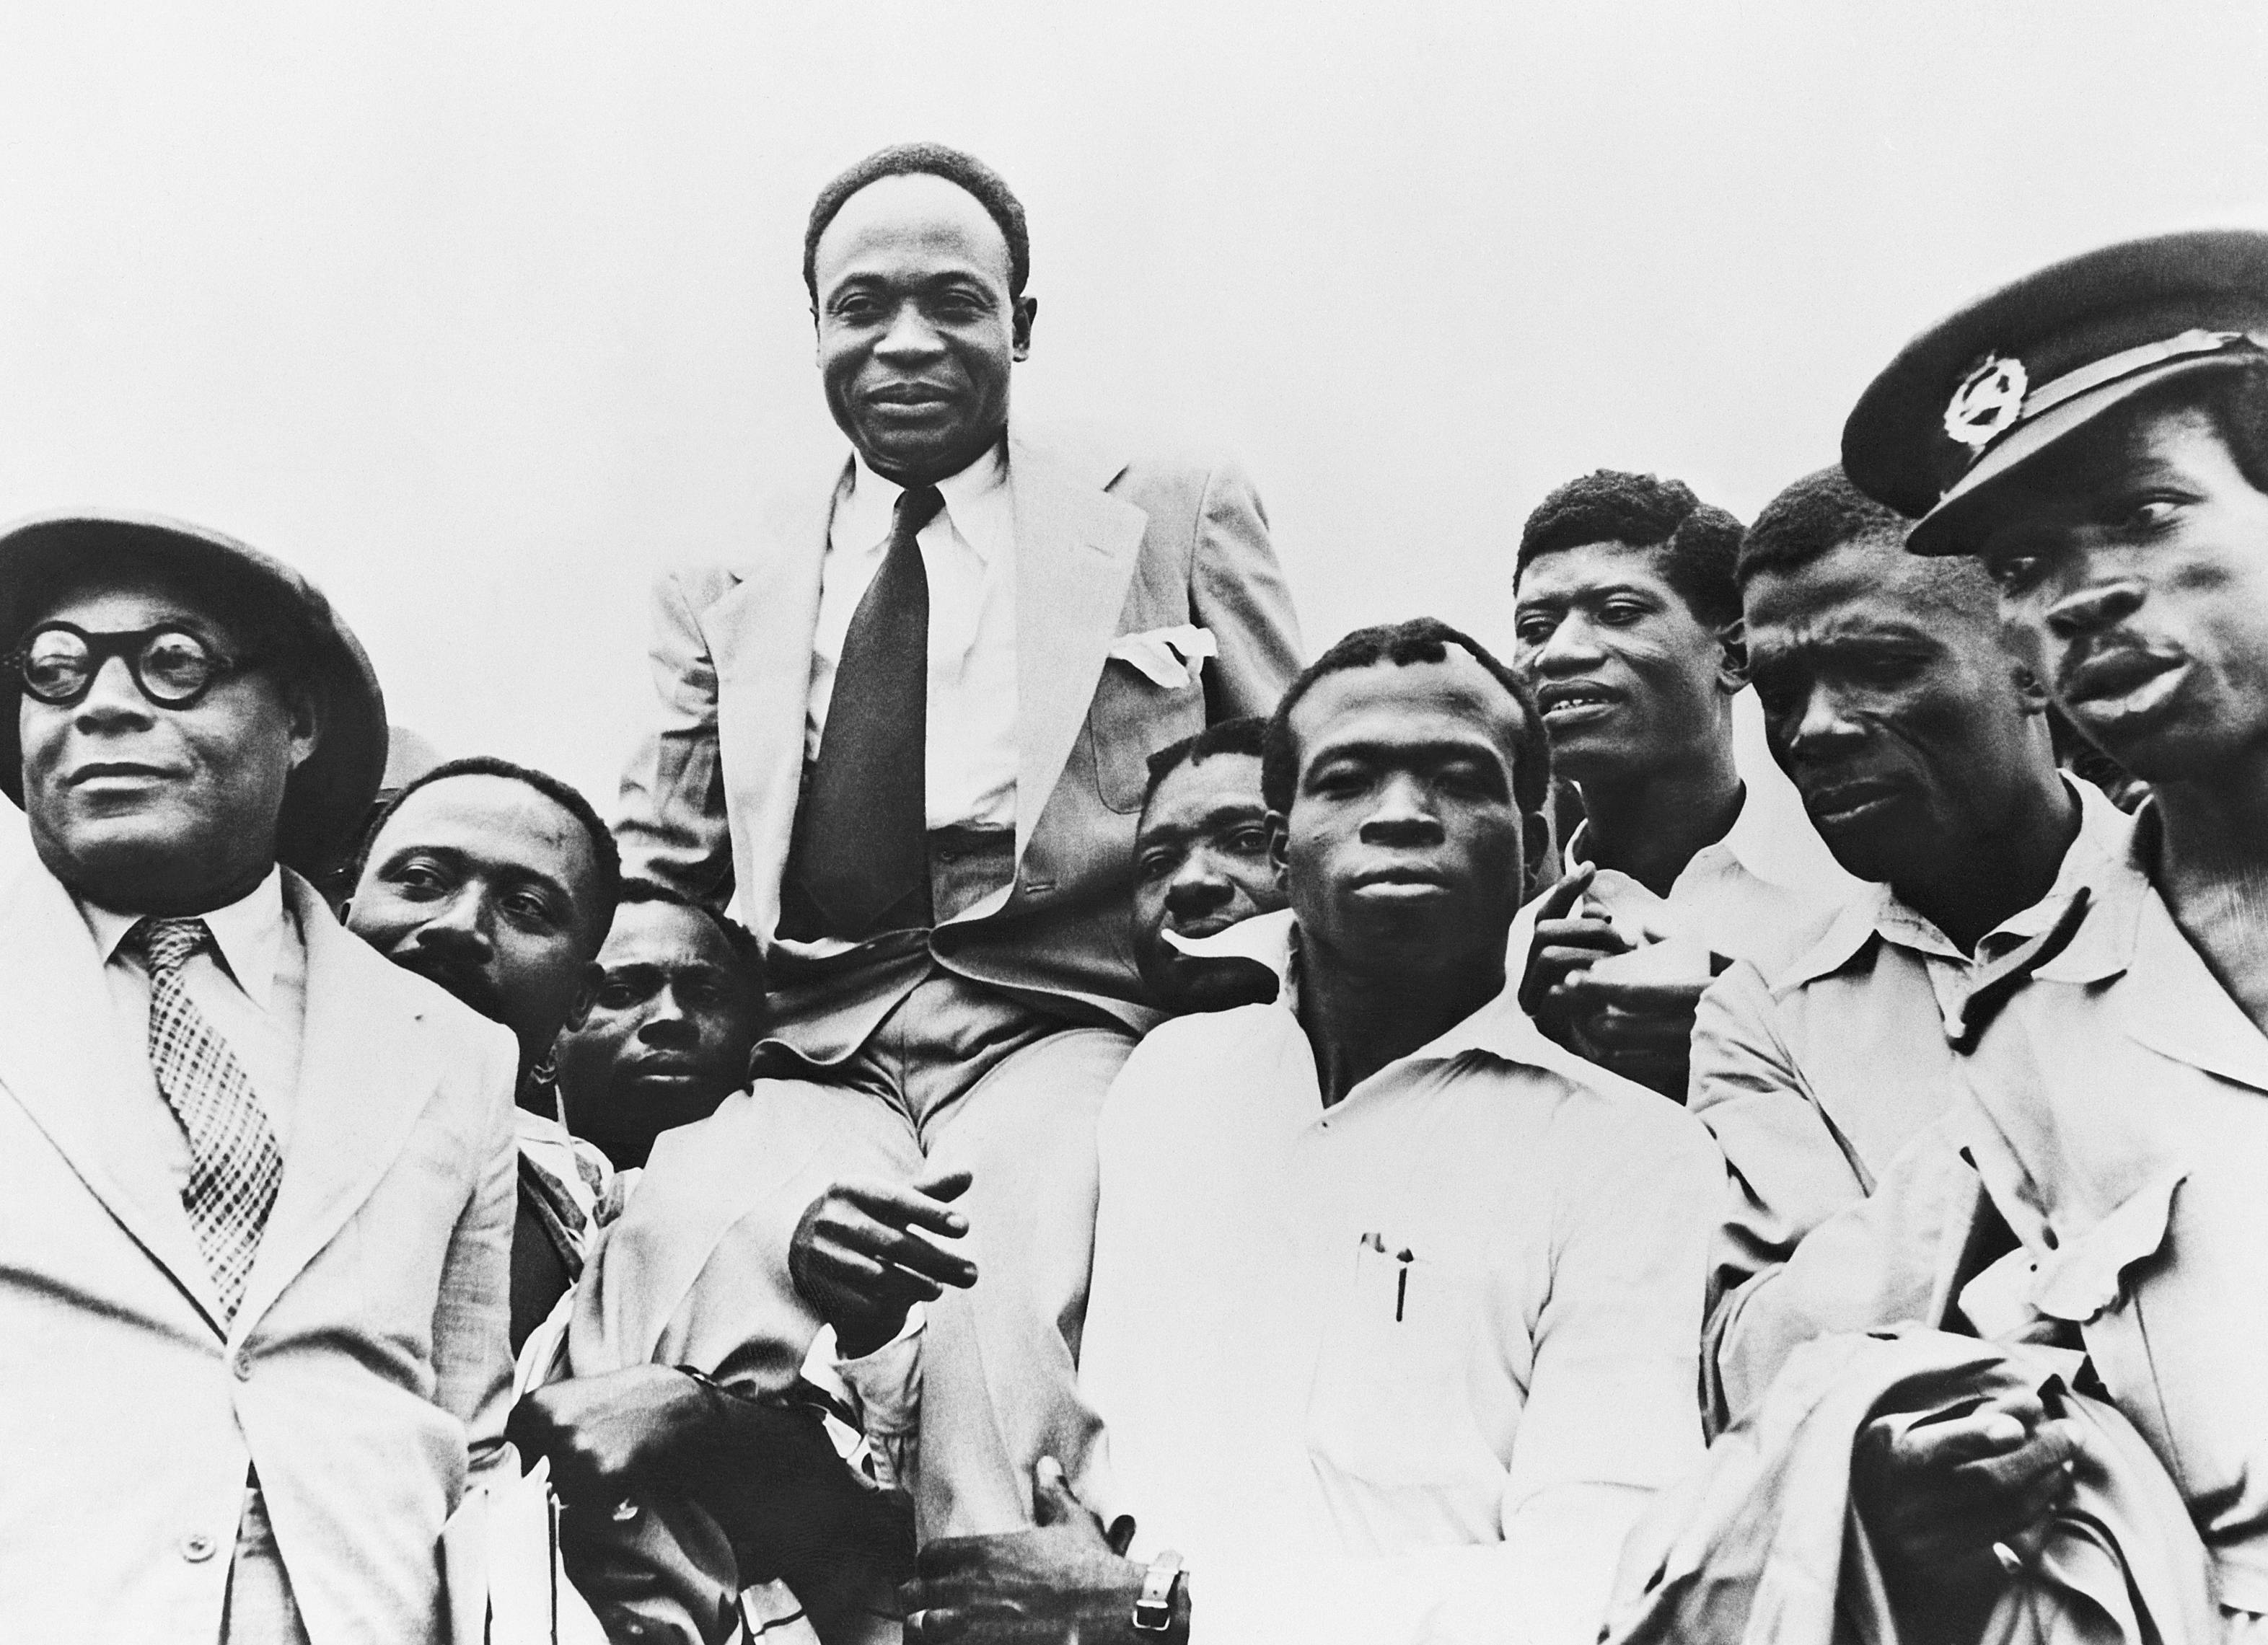 Government officials carry Prime Minister Kwame Nkrumah on their shoulders after Ghana obtains its independence from Great Britain.